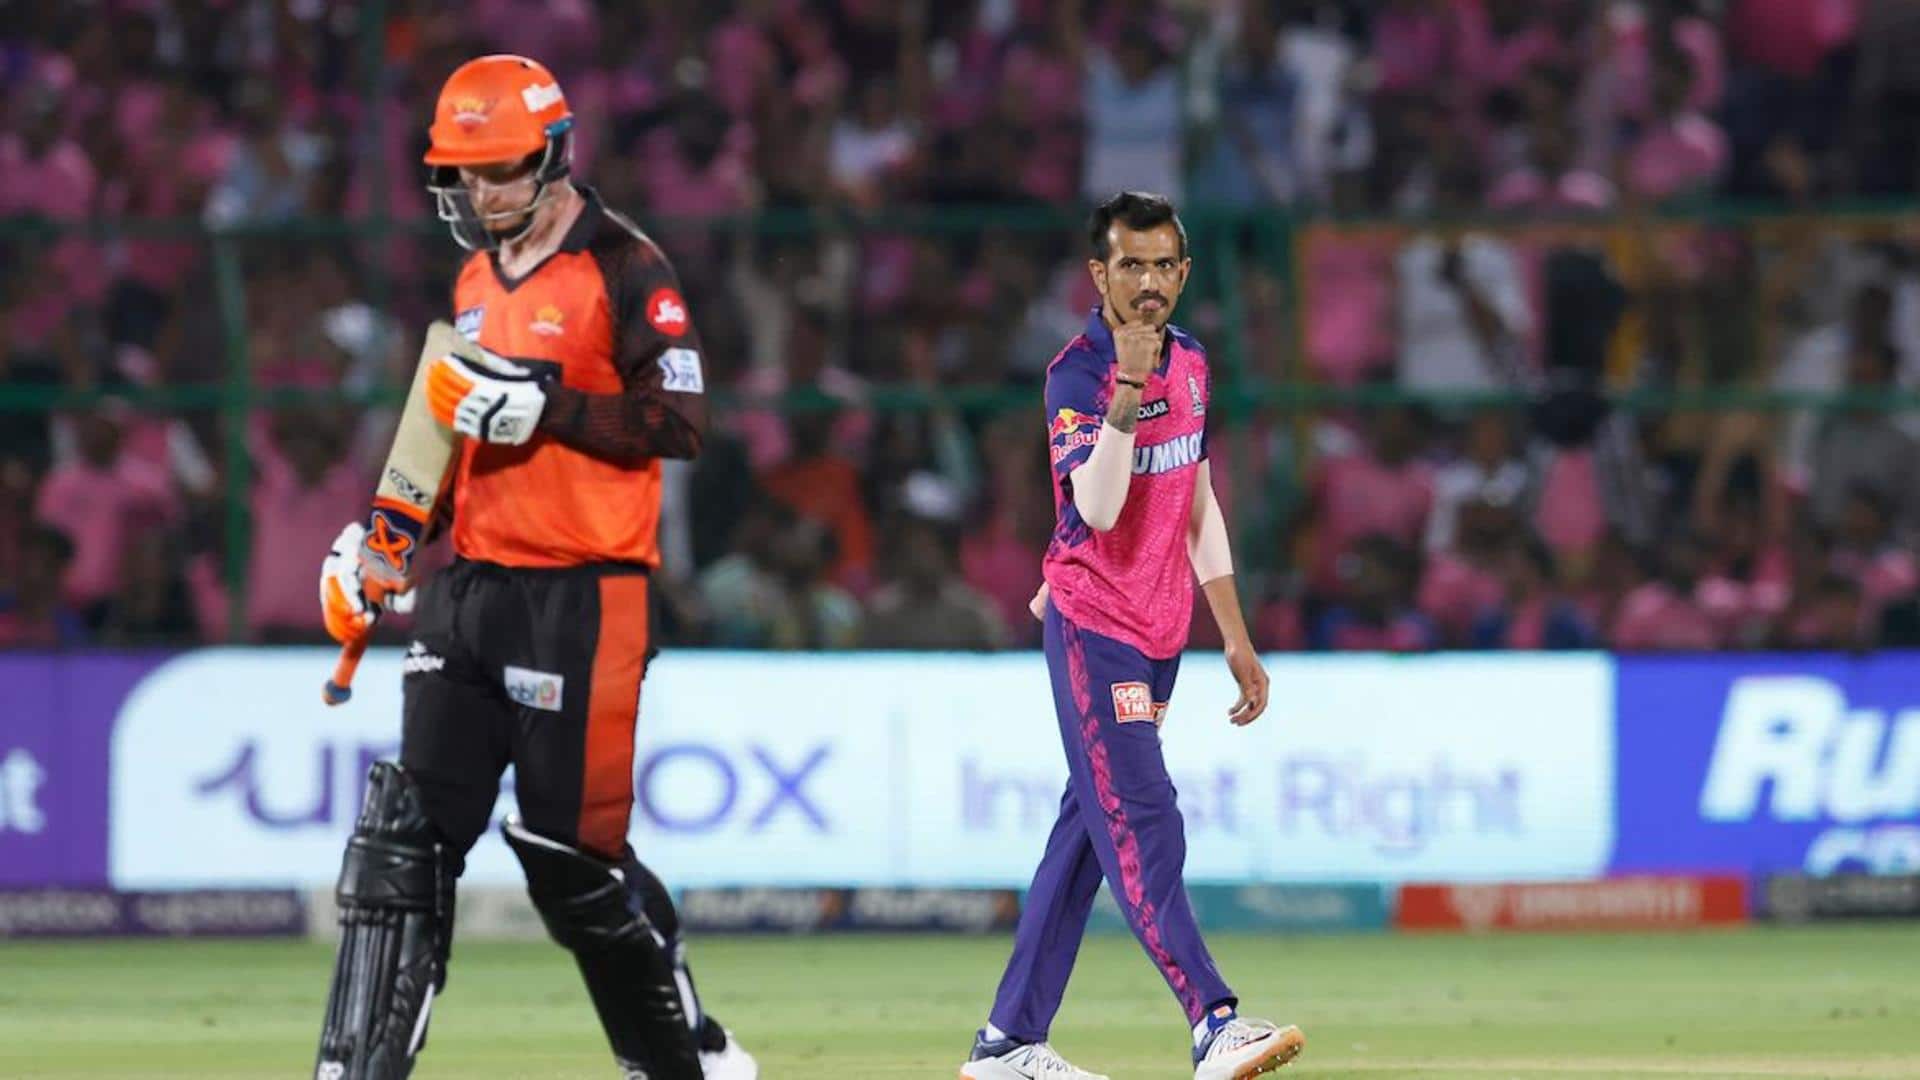 Yuzvendra Chahal equals Bravo as the joint-highest IPL wicket-taker: Stats